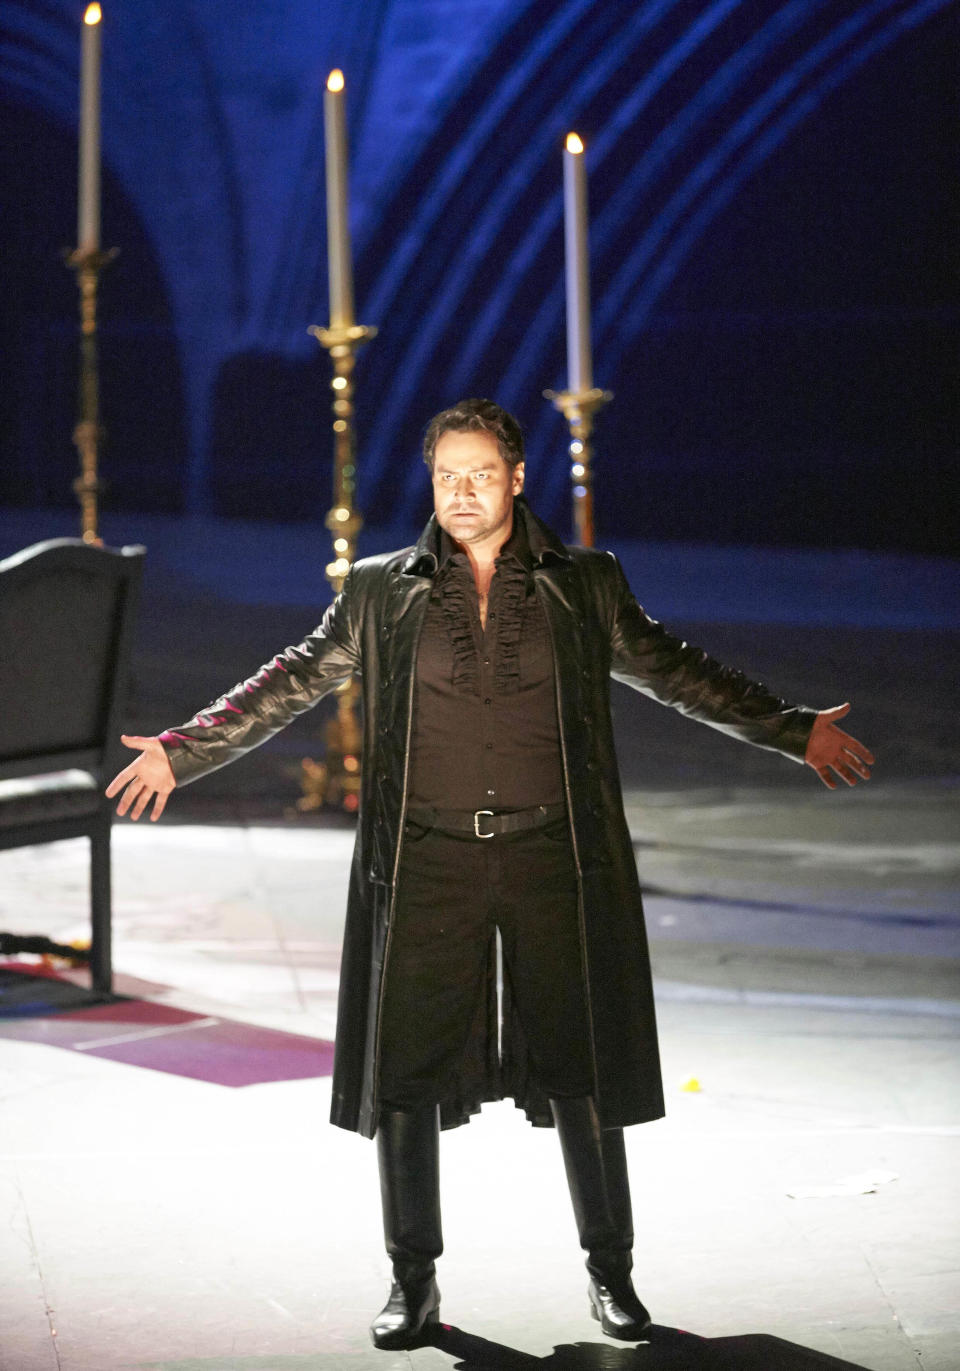 In this March 2, 2013 photo provided by the Vienna State Opera Ildar Abdrazakov in the role of Don Giovanni performs during a dress rehearsal for Wolfgang Amadeus Mozart's opera "Don Giovanni" at the state opera in Vienna, Austria. (AP Photo/Vienna State Opera, Michael Poehn)